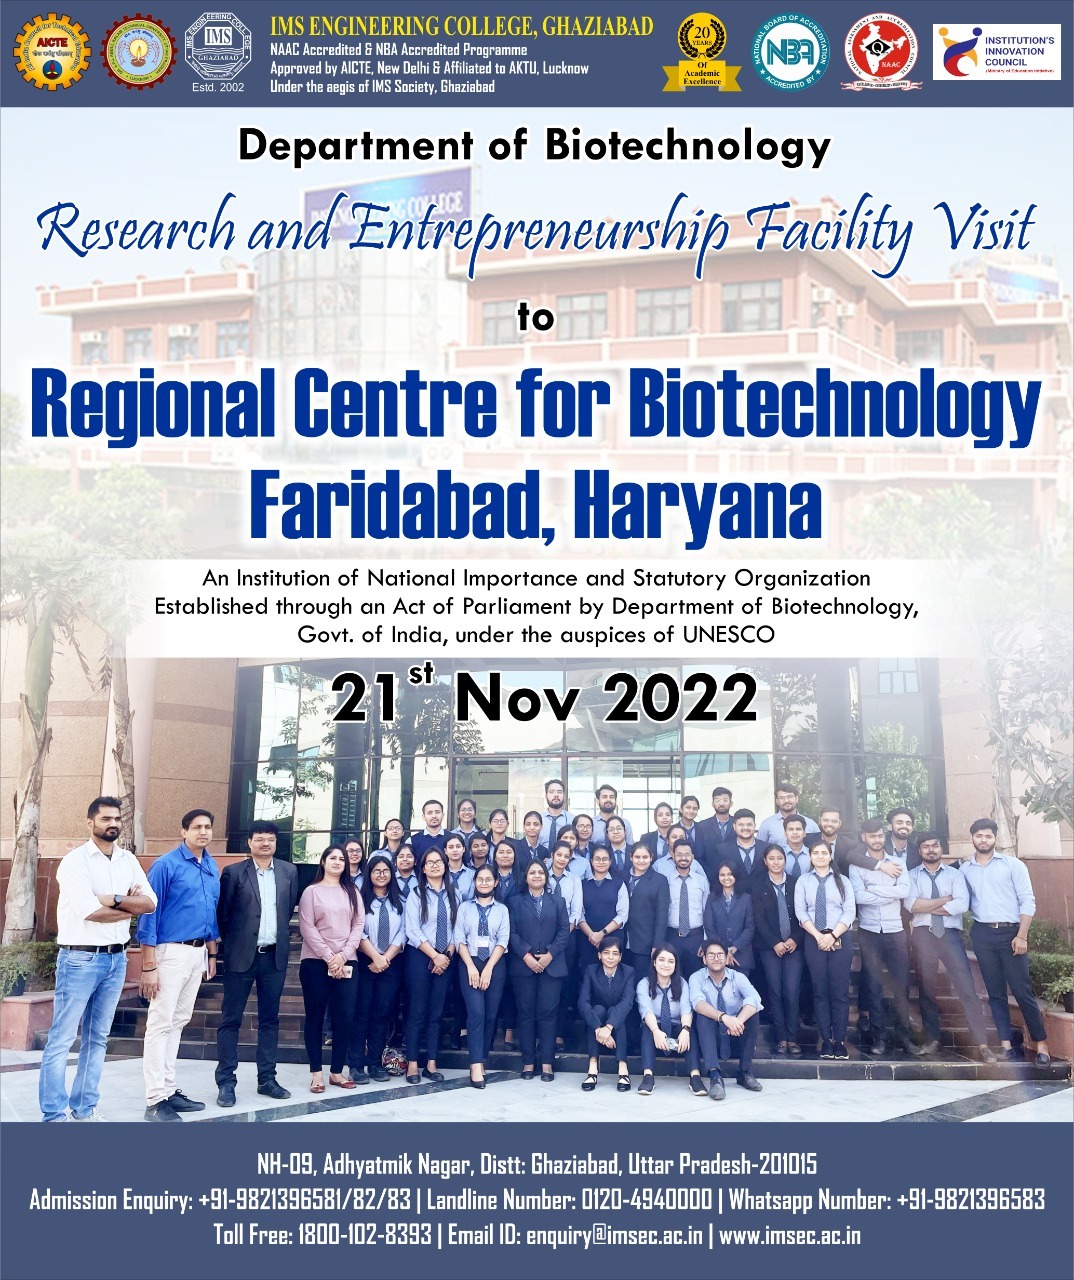 A research and entrepreneurship facility visit to Regional Centre Biotechnology Faridabad